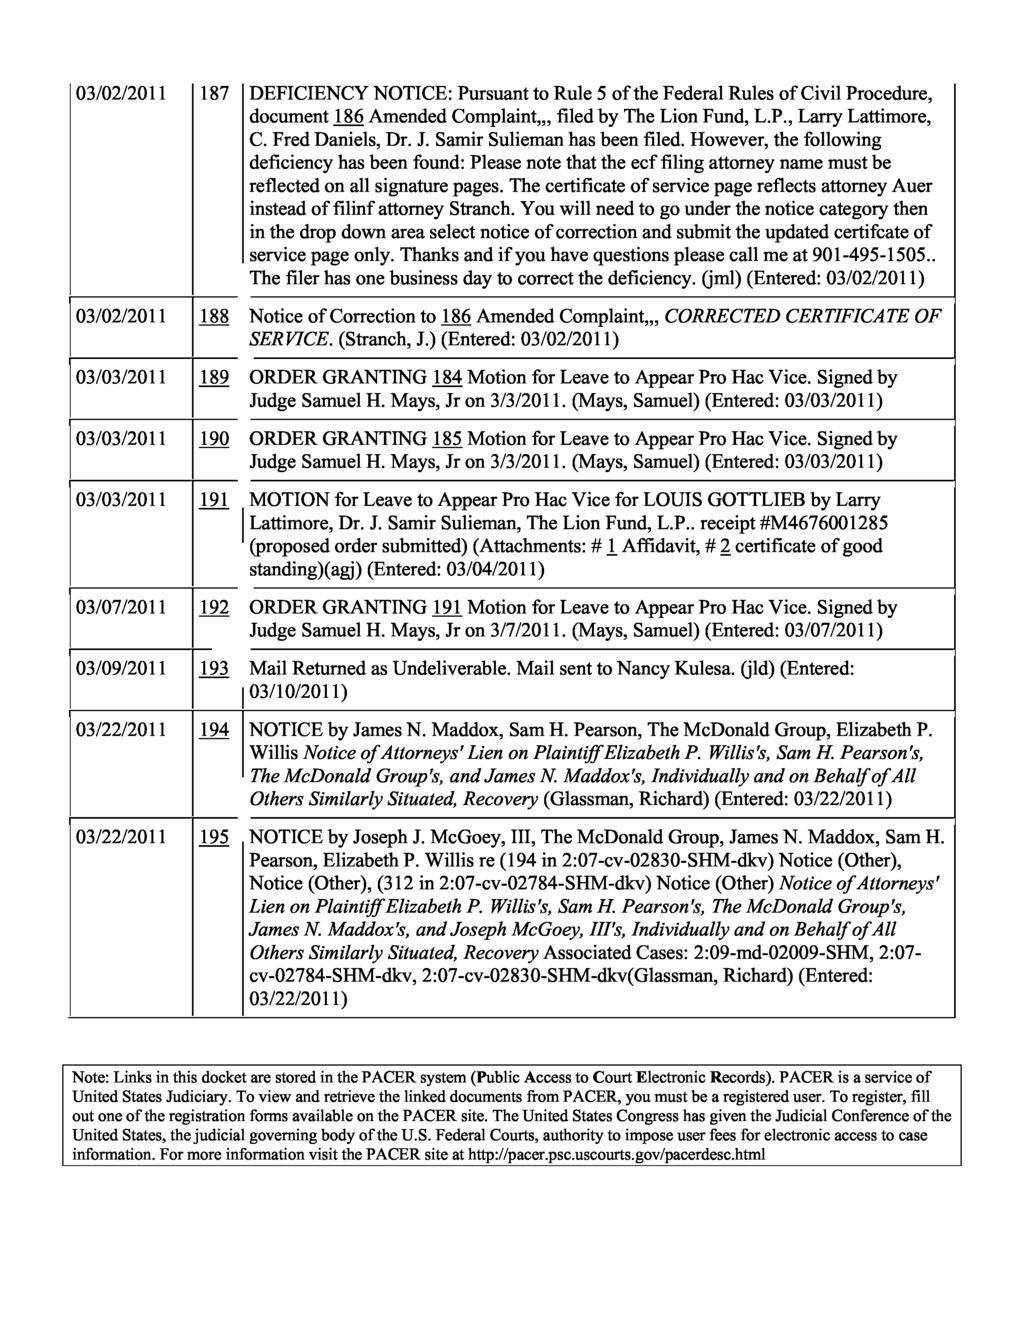 03/02/2011 187 DEFICIENCY NOTICE: Pursuant to Rule 5 of the Federal Rules of Civil Procedure, document 186 Amended Complaint,,, filed by The Lion Fund, L.P., Larry Lattimore, C. Fred Daniels, Dr. J.